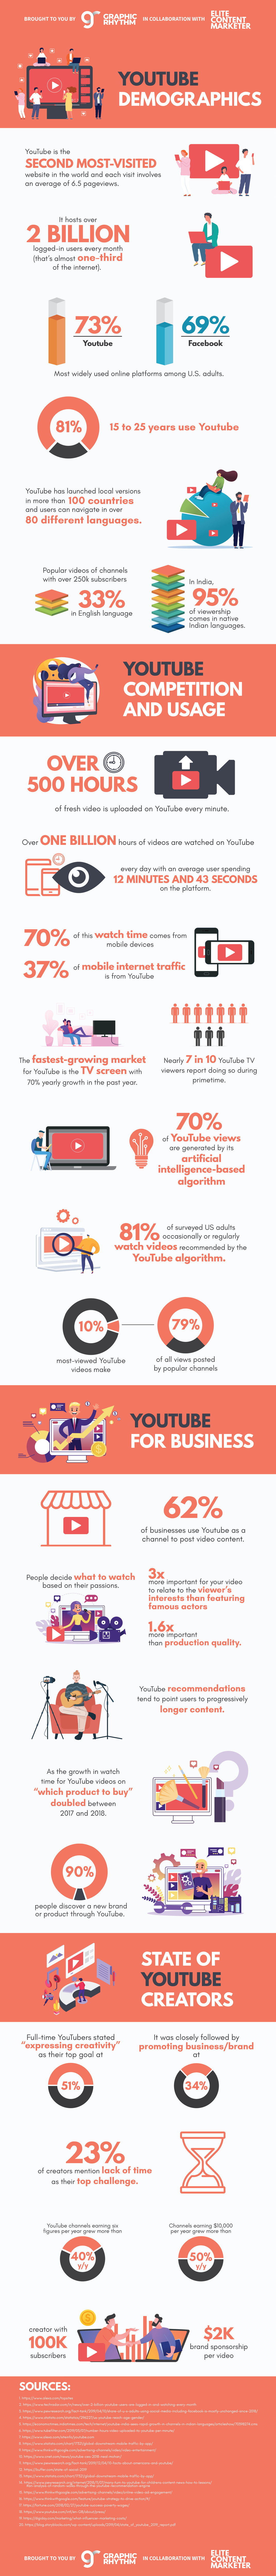 Top YouTube Statistics You Need To Know In 2020 [Infographic] | DeviceDaily.com